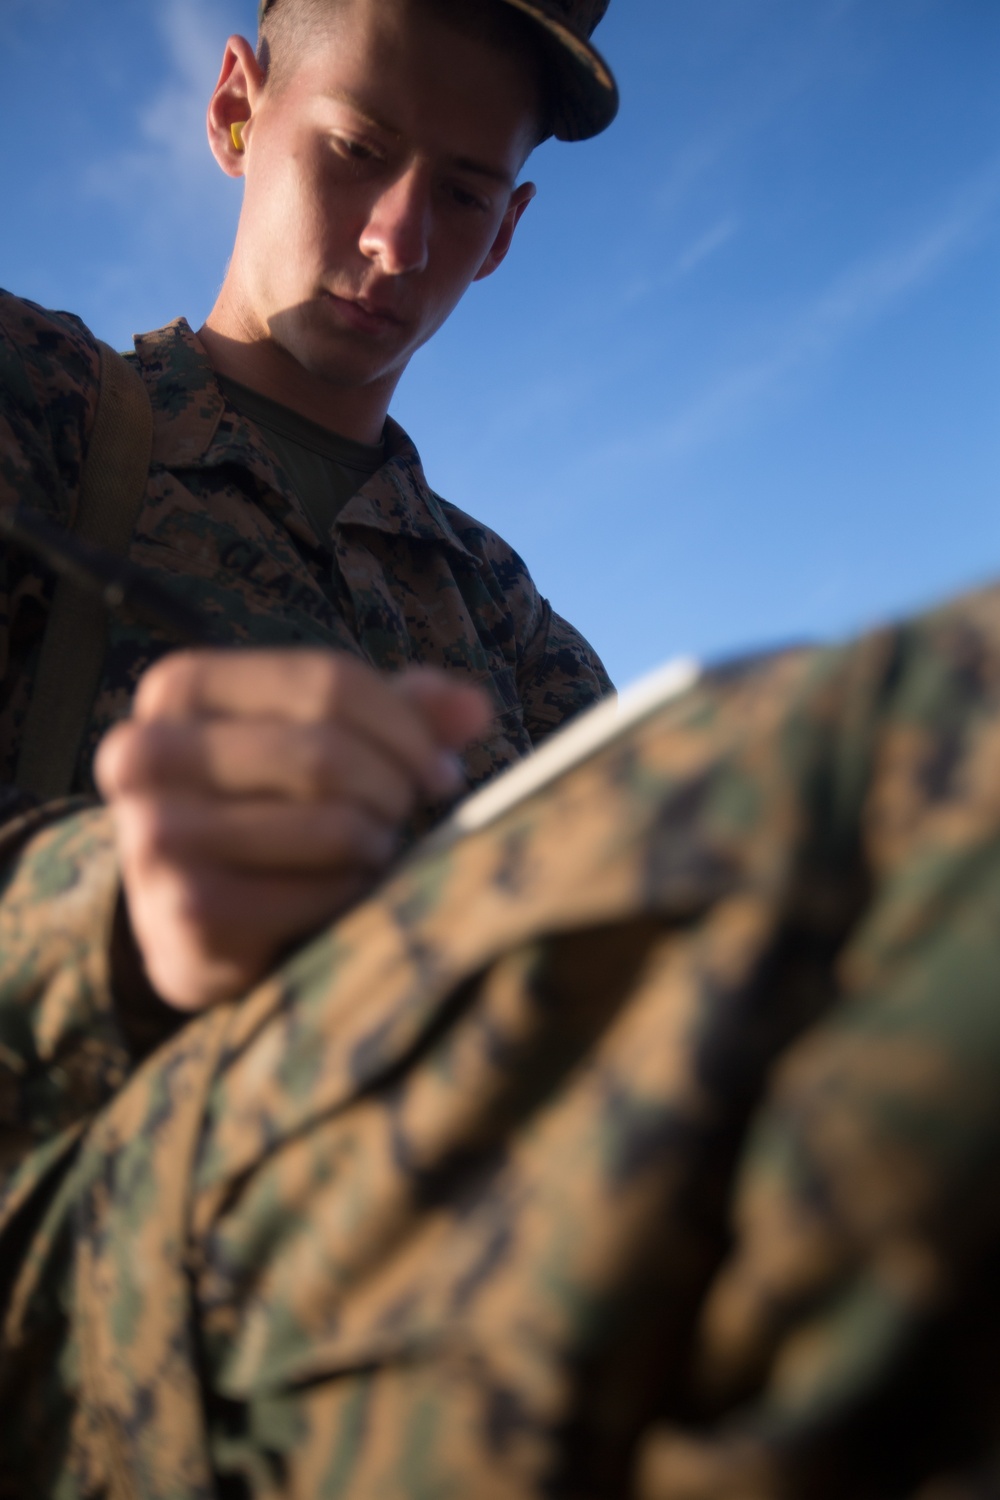 California, Md., native training at Parris Island to become U.S. Marine